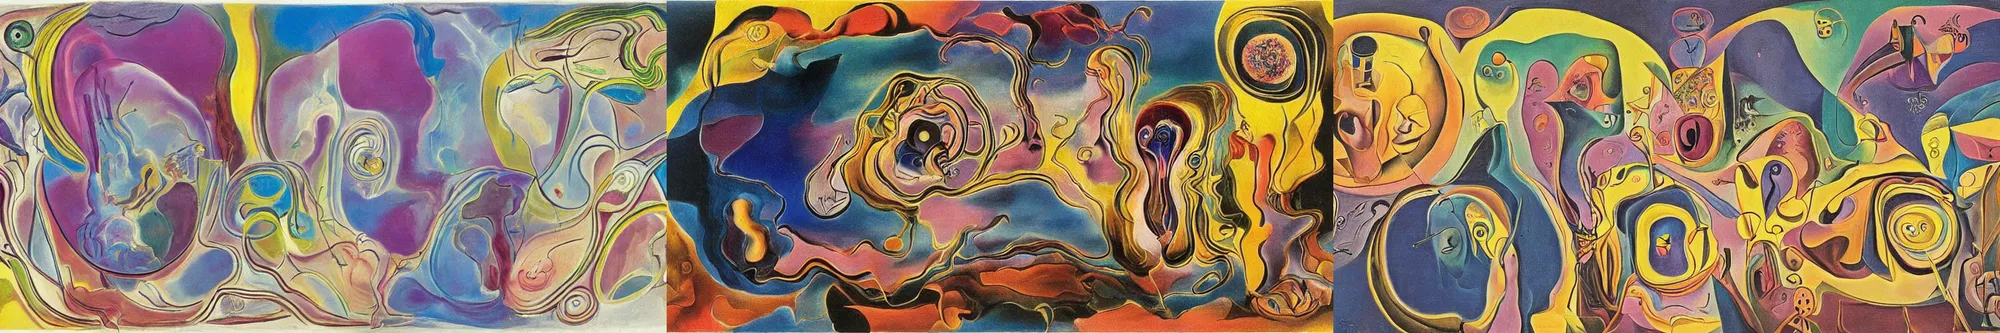 Prompt: A Whirlpool of cosmic energy, surrealistic style by Salvador Dali and Pablo Picasso, Chaotic Composition, Pastel Color Scheme